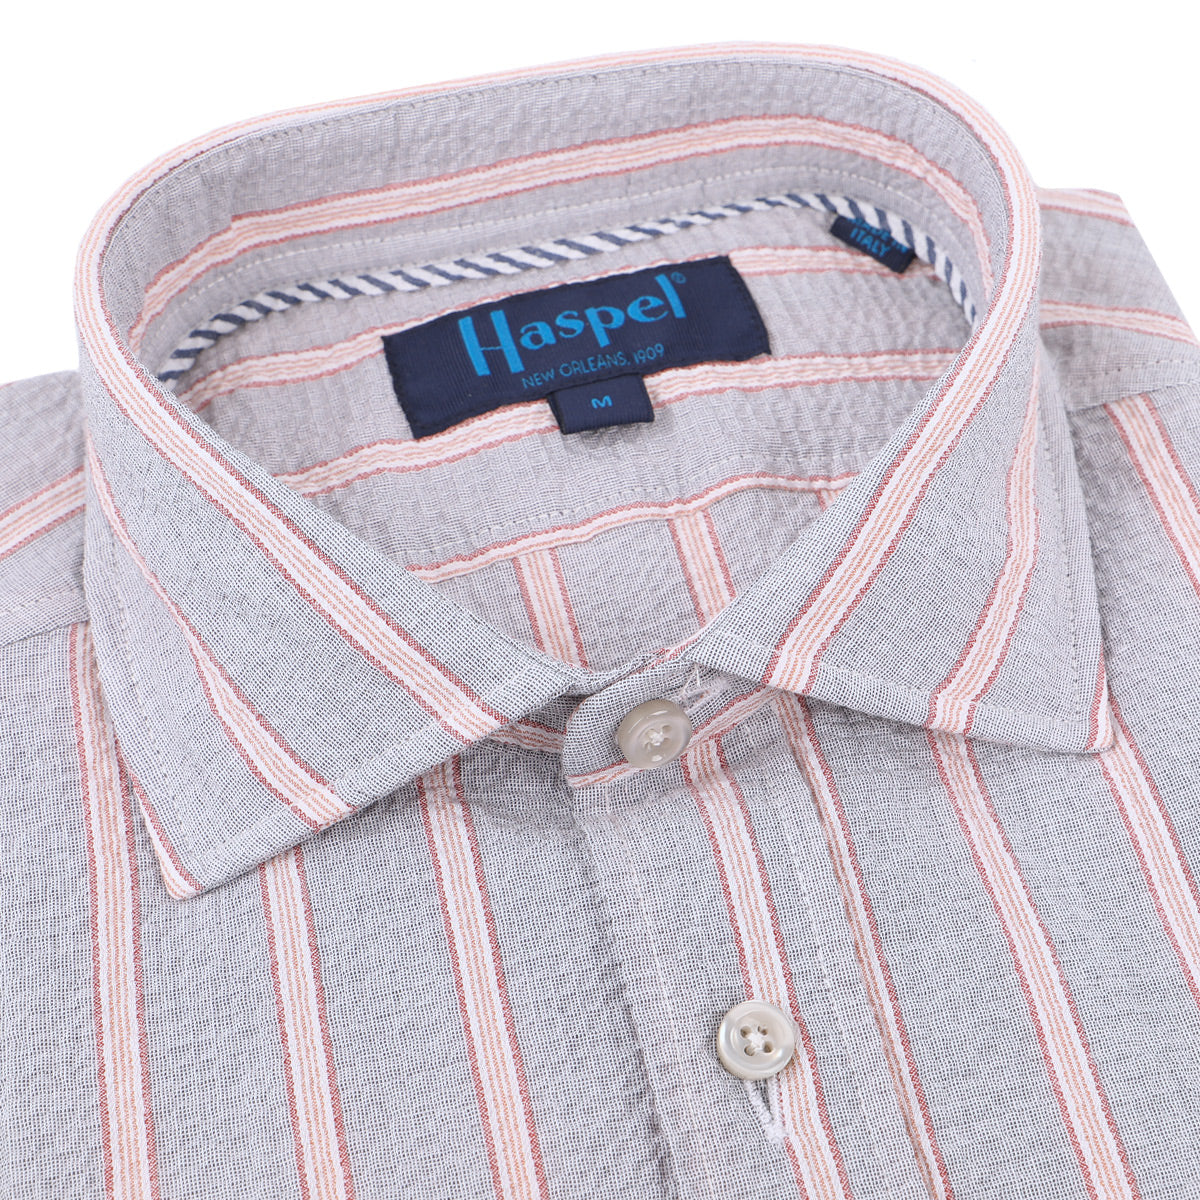 Seersucker is our game, let us help you with yours. Distinctive stripes to stand out and our unique seersucker texture to keep you cool.   100% Cotton Seersucker • Spread Collar • Long Sleeve • Chest Pocket • Machine Washable • Made in Italy